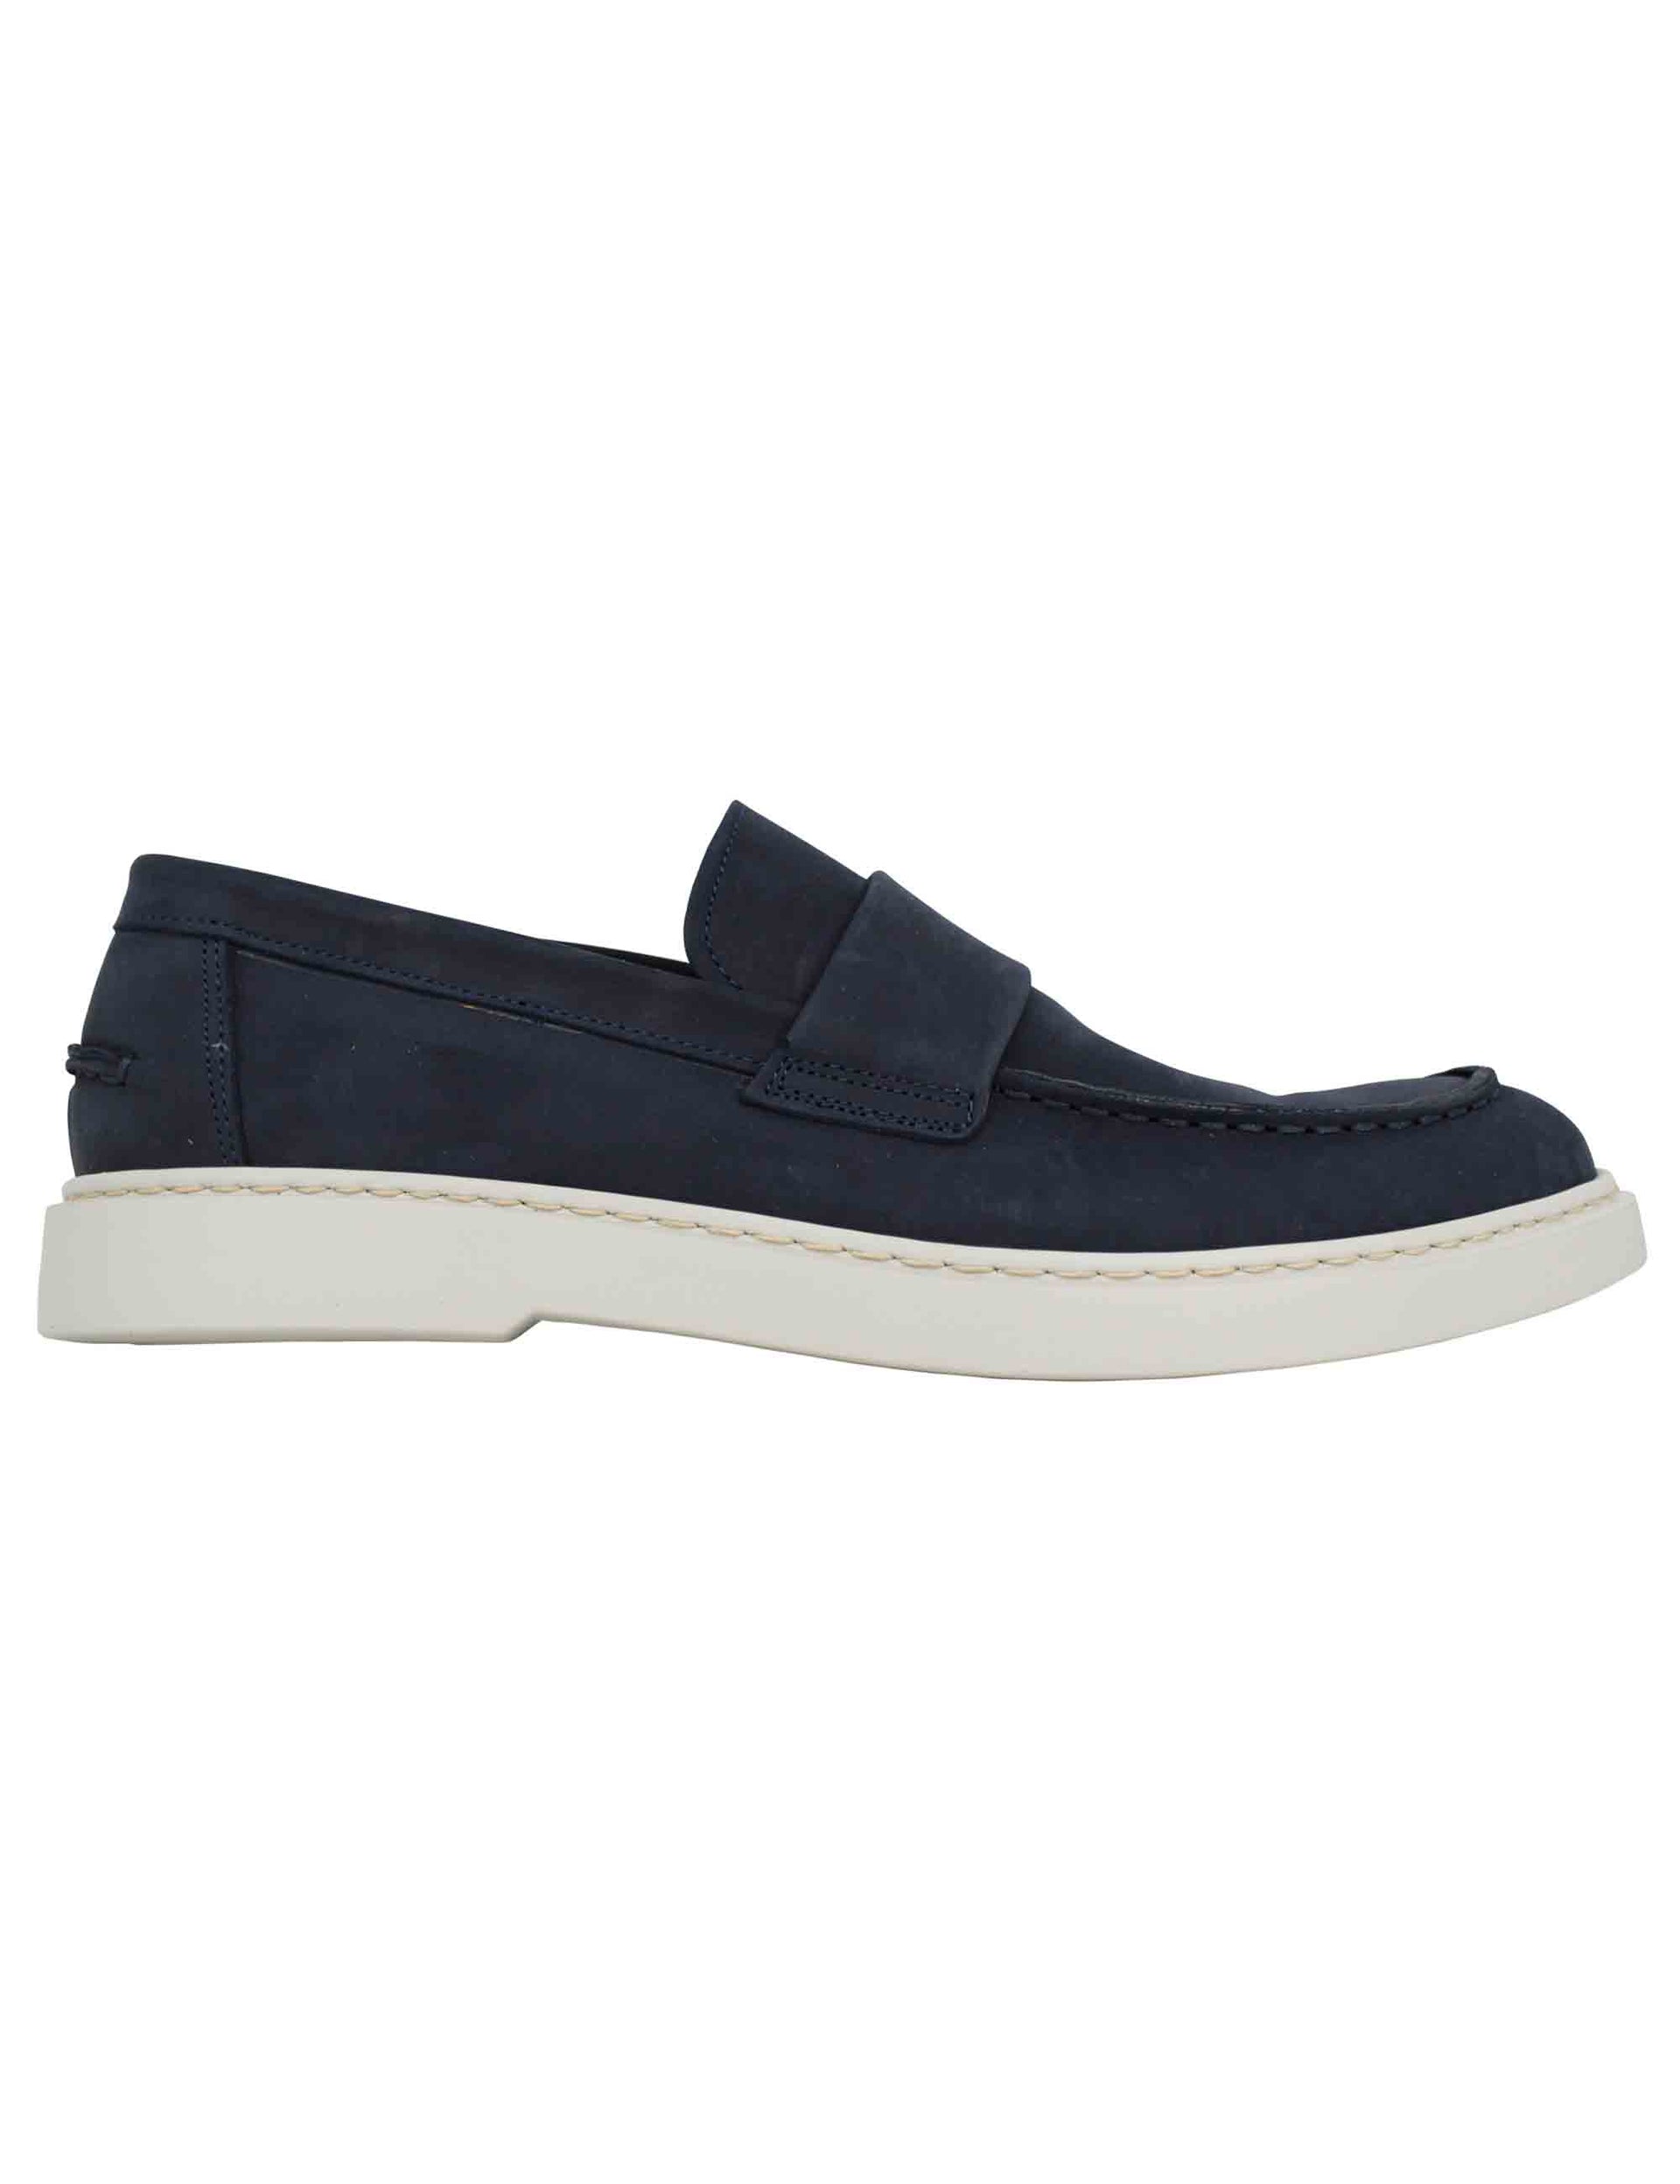 Men's moccasins in blue suede with white rubber sole